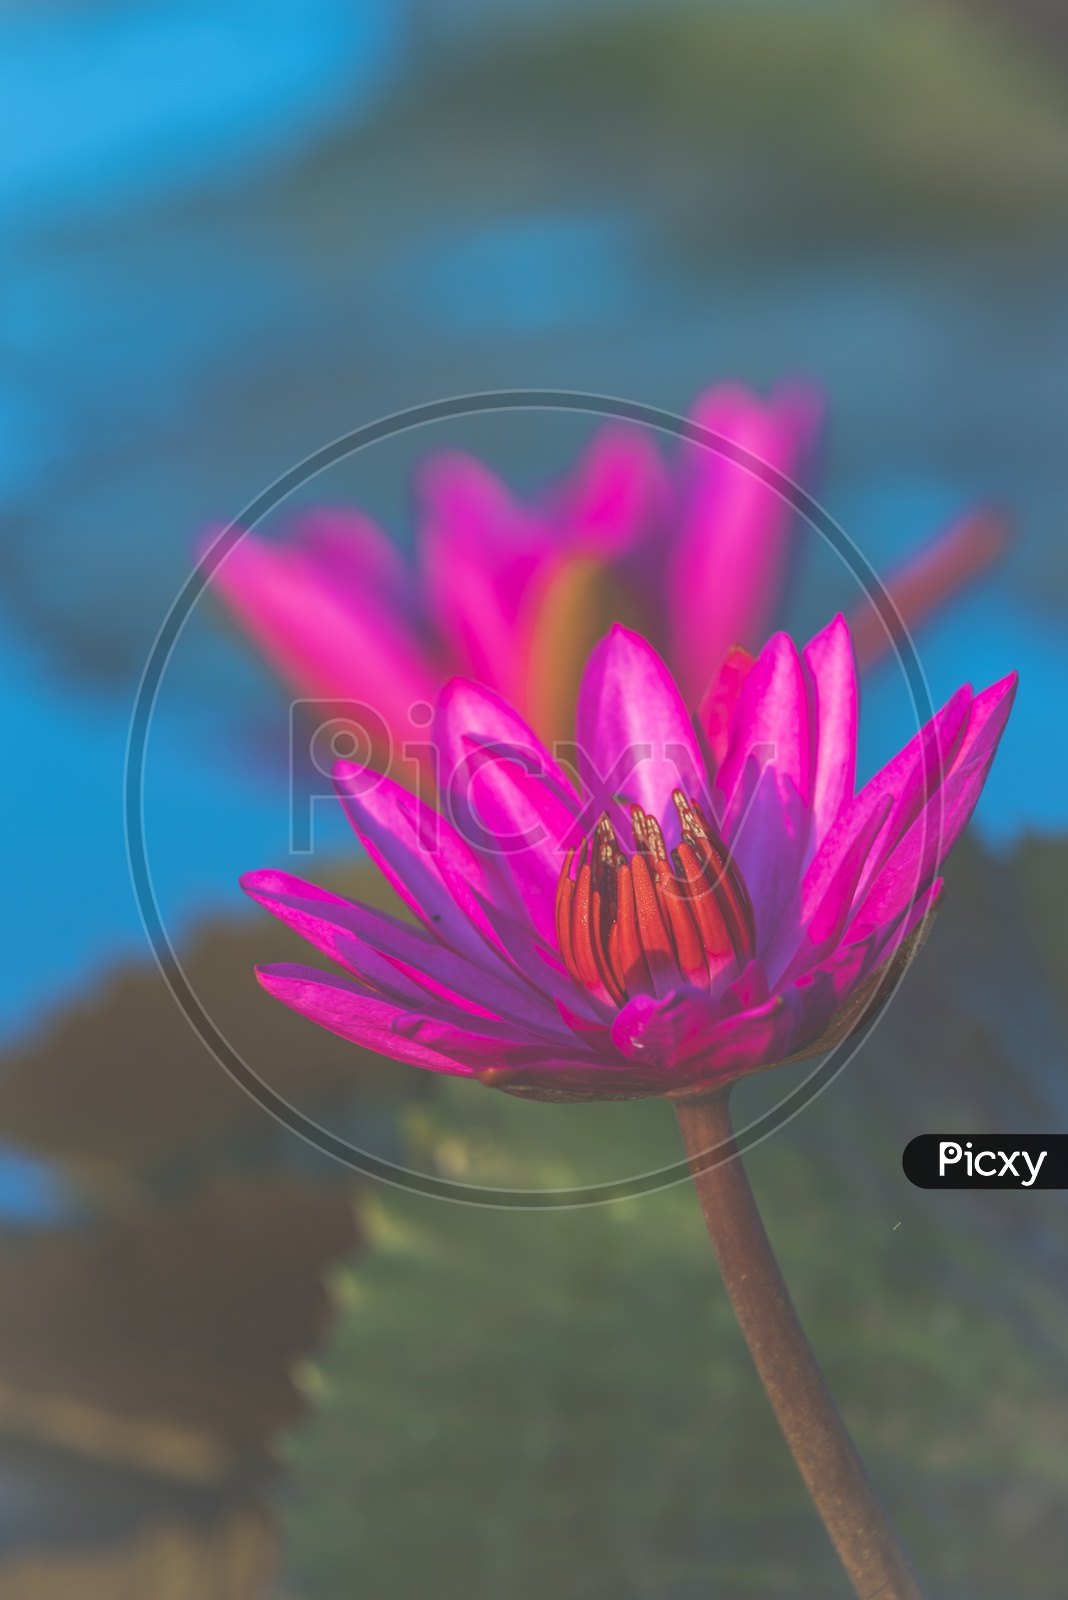 Tropical lake with pink lotus flower close up in the pond, vintage filter image